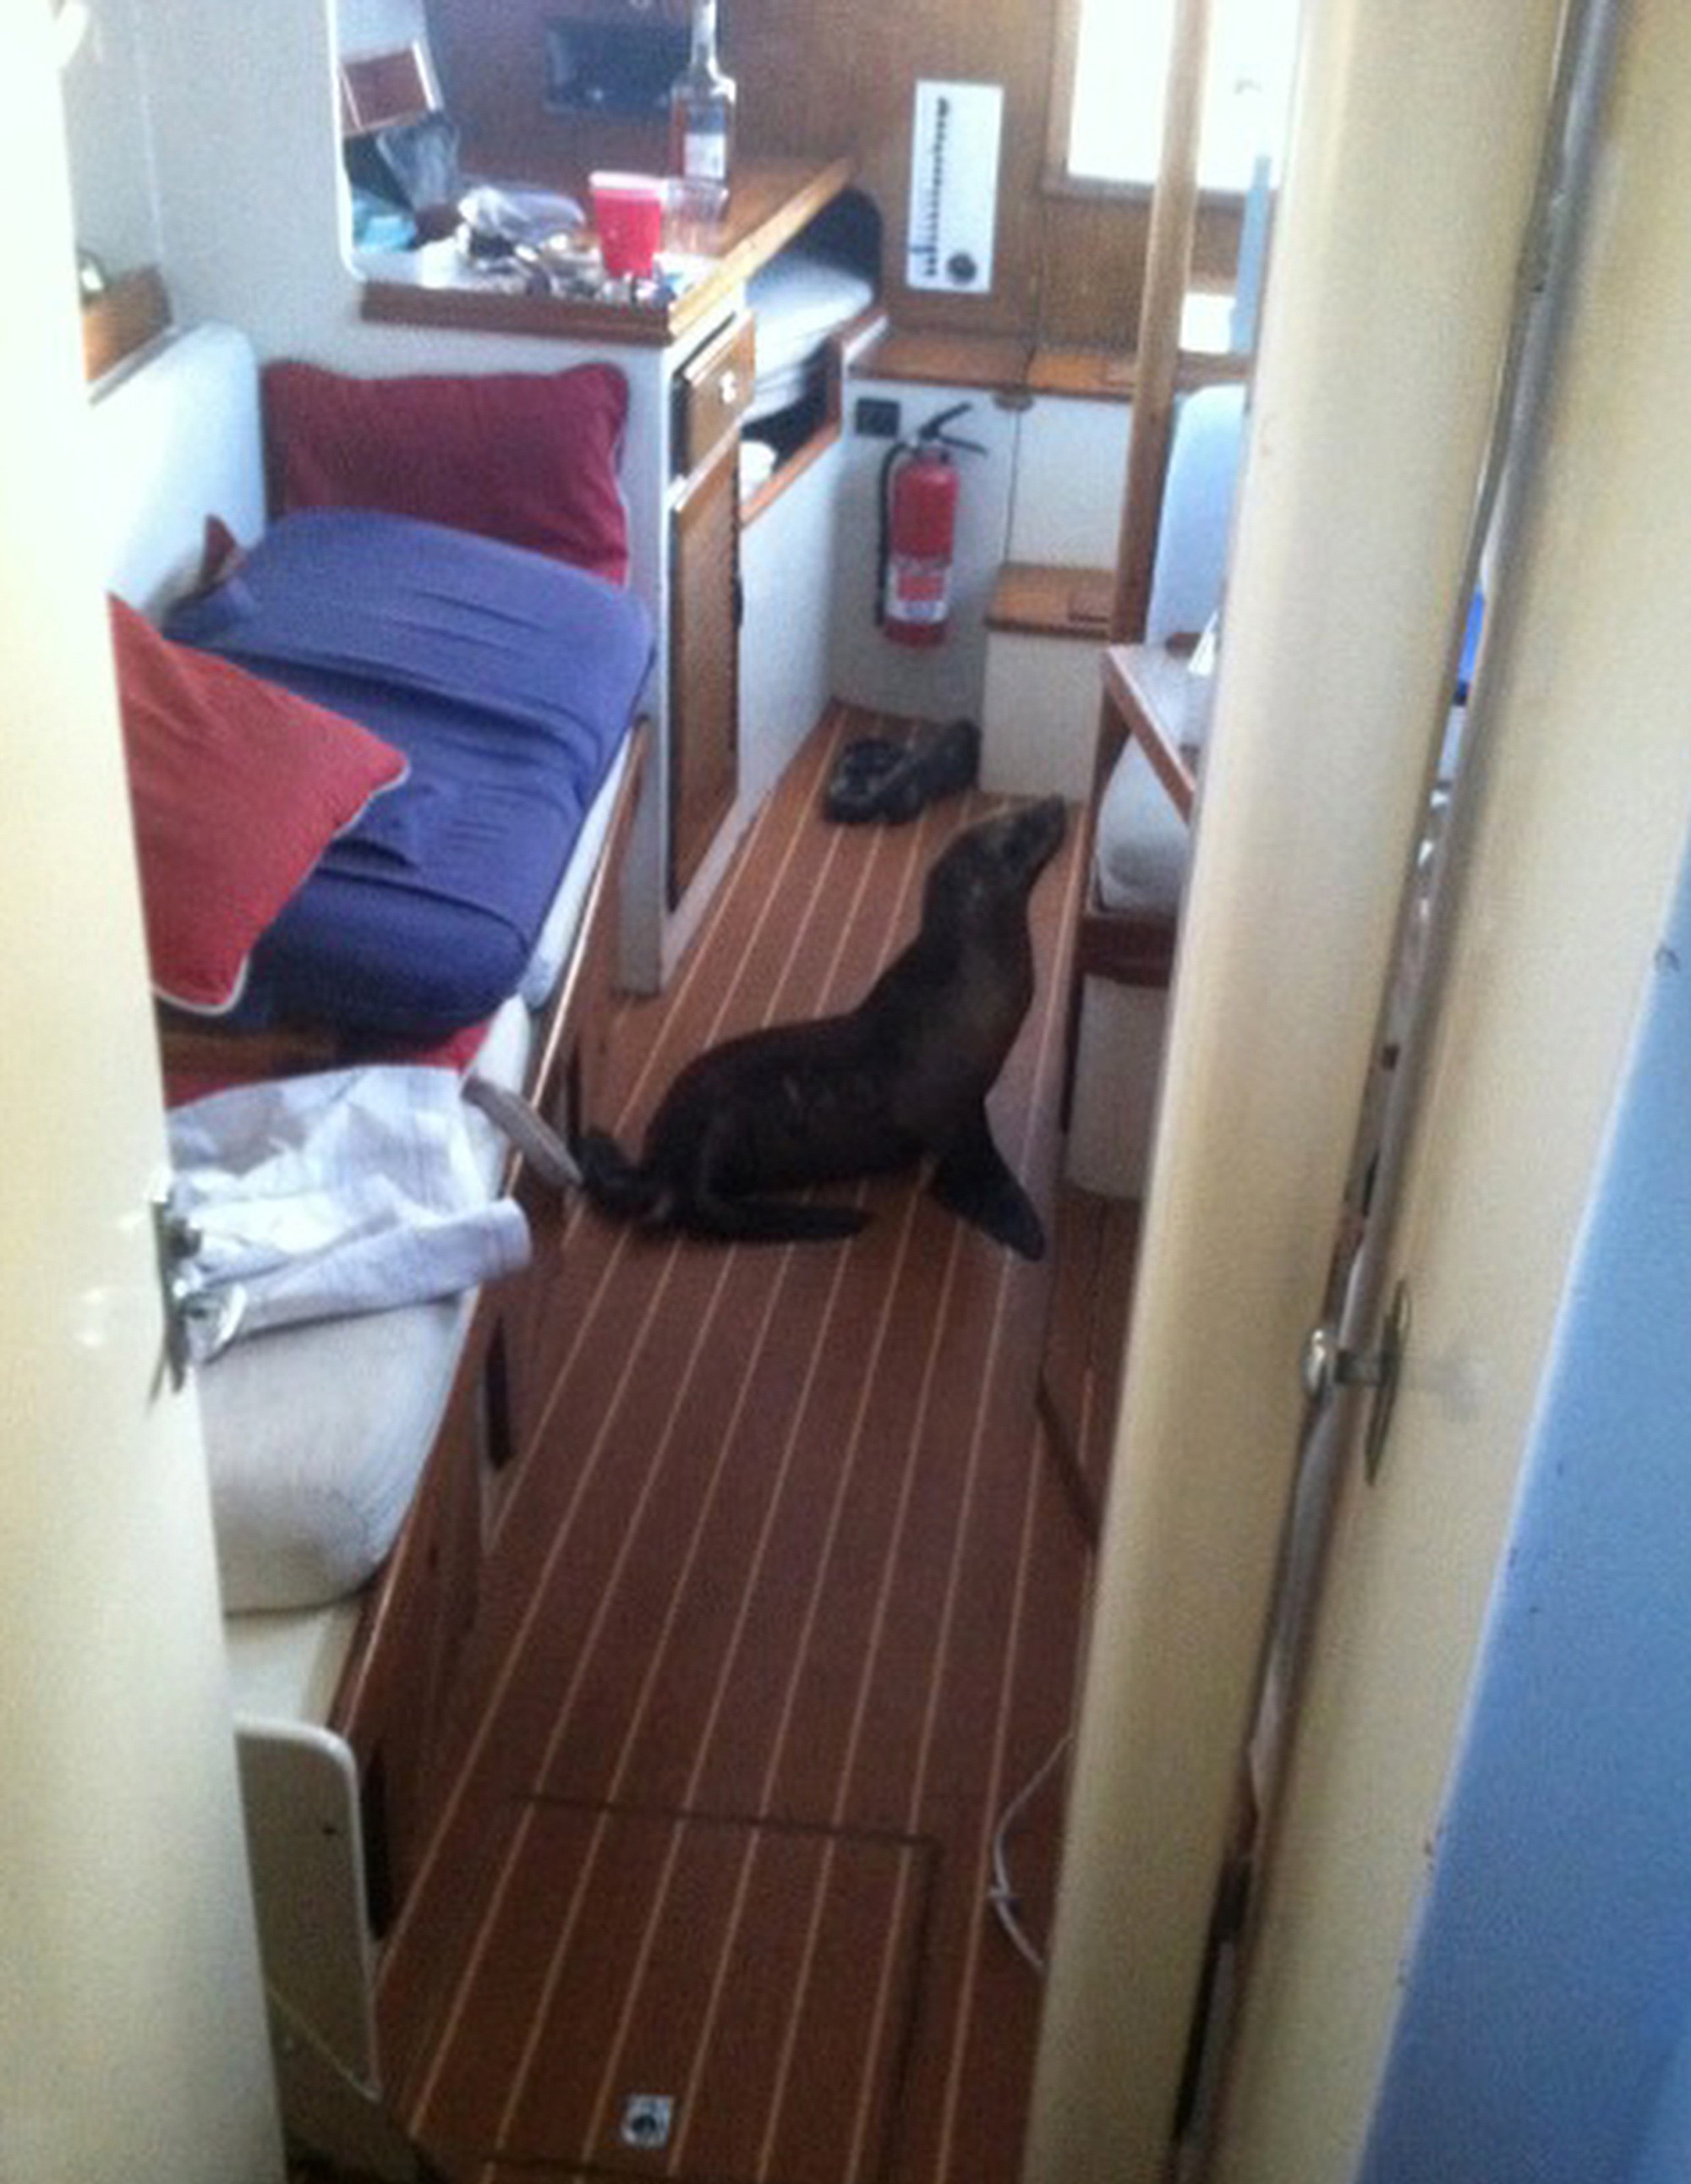 A 35-pound sea lion pup found it's away aboard a 41-foot Kettenburg boat Sunday in San Diego, Calif.